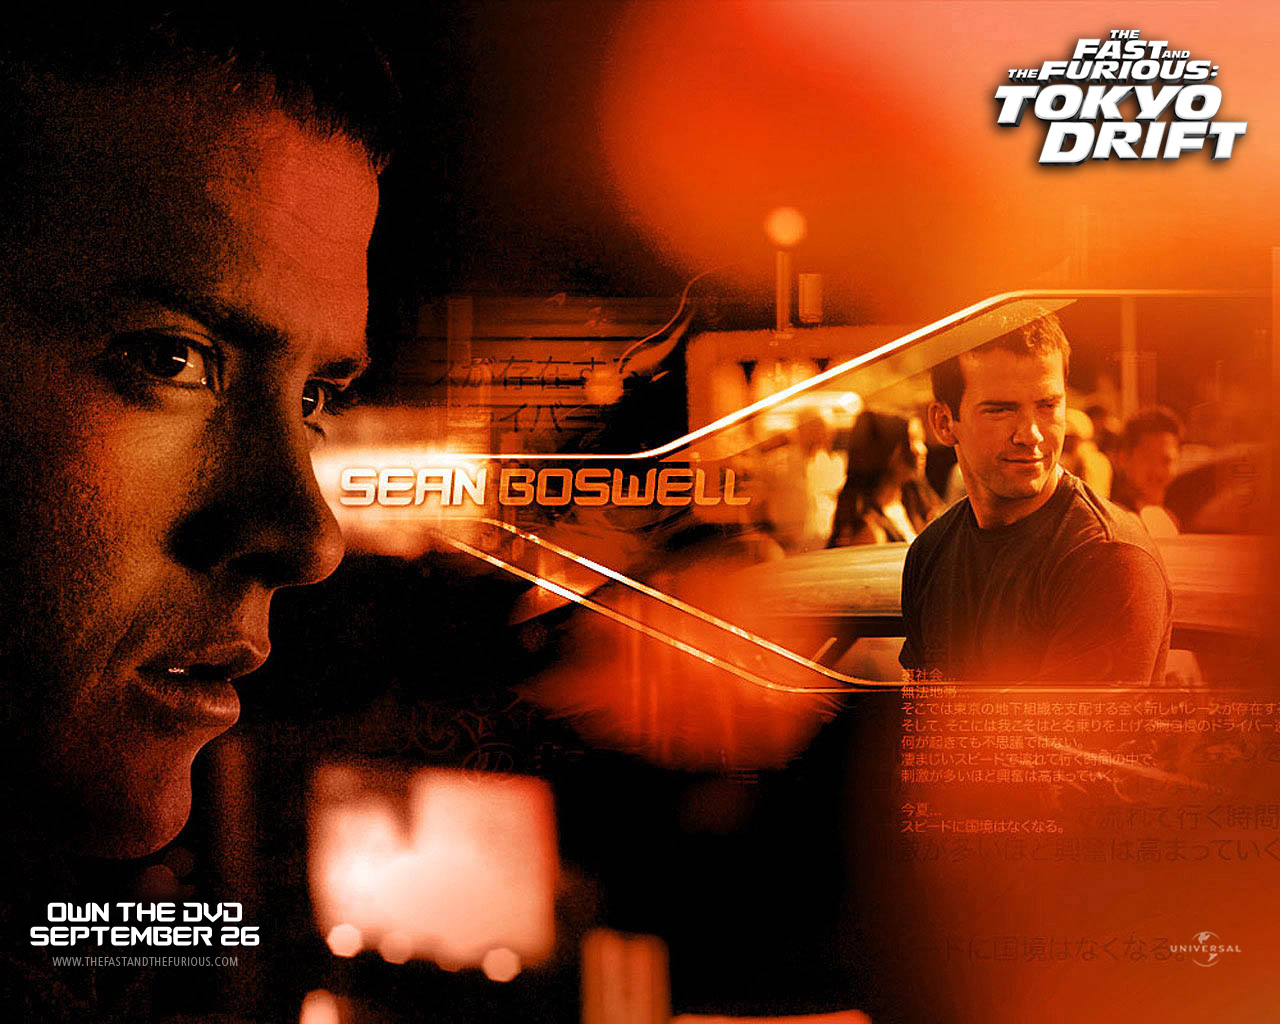 Movie Freak 77: Series Review 1.3: The Fast and the Furious: Tokyo Drift(2006)